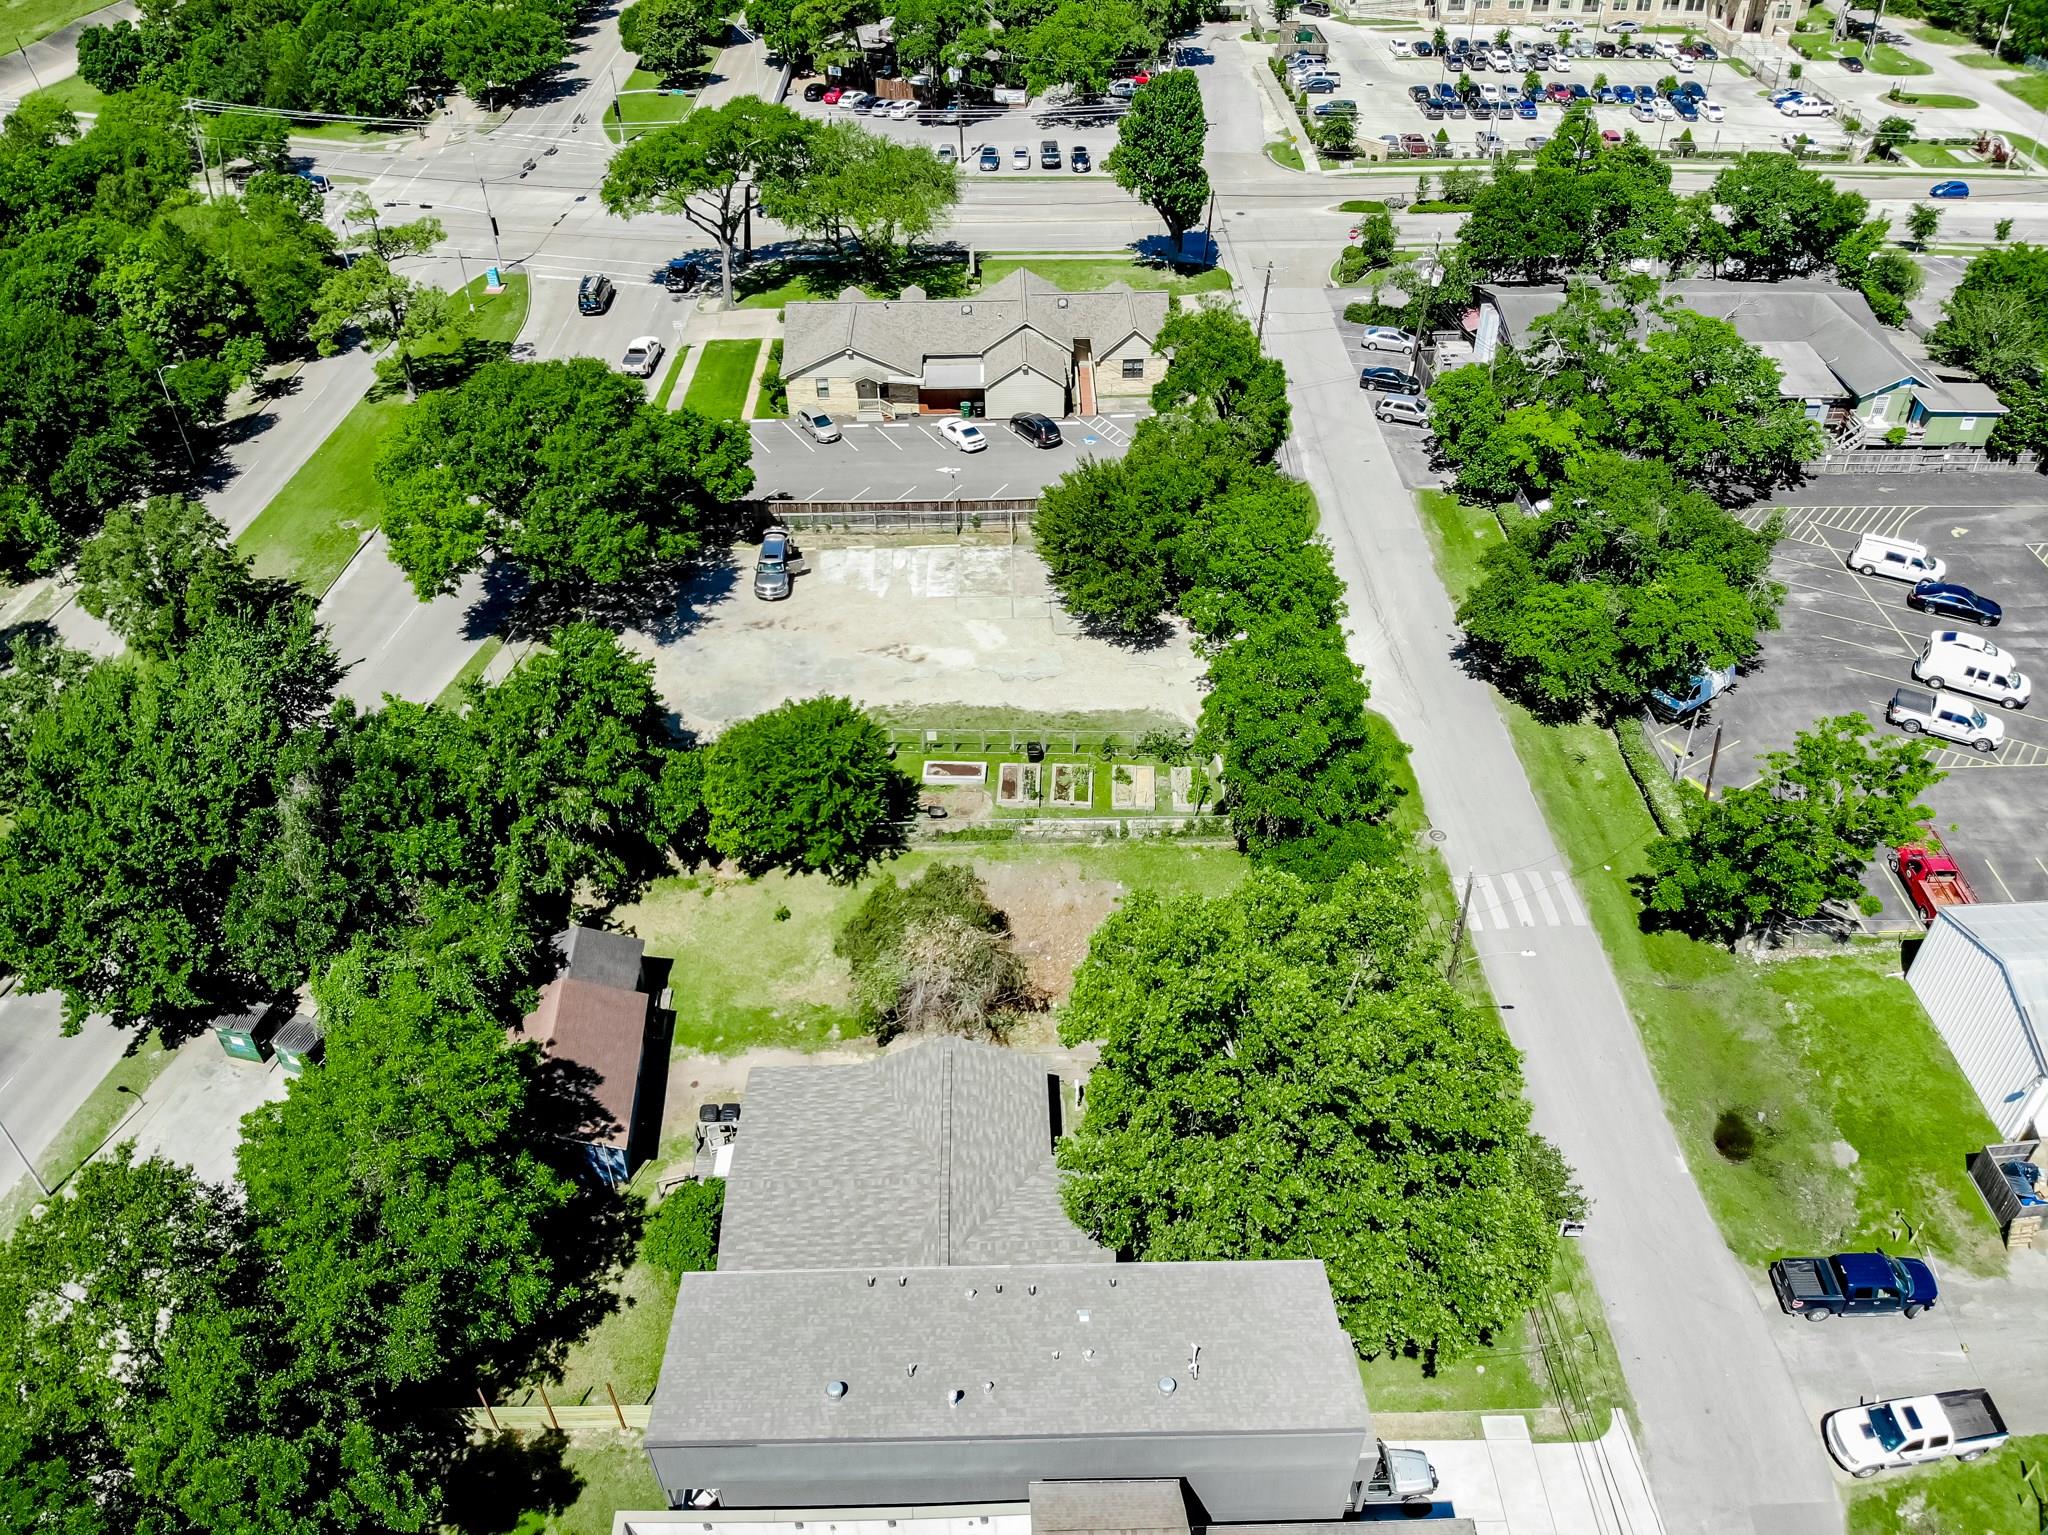 EASY ACCESS TO ALL MAJOR FREEWAYS, BACK STREETS, PARKS, ENTERTAINMENT, GROCERY STORES, RESTAURANTS, BREWERY'S IN THE HEART OF HEIGHTS/SHADY ACRES. FIRST TIME AVAILABLE SINCE THE 40'S! DON'T MISS THE OPPORTUNITY! - If you have additional questions regarding 1610 W 21st Street  in Houston or would like to tour the property with us call 800-660-1022 and reference MLS# 20416655.